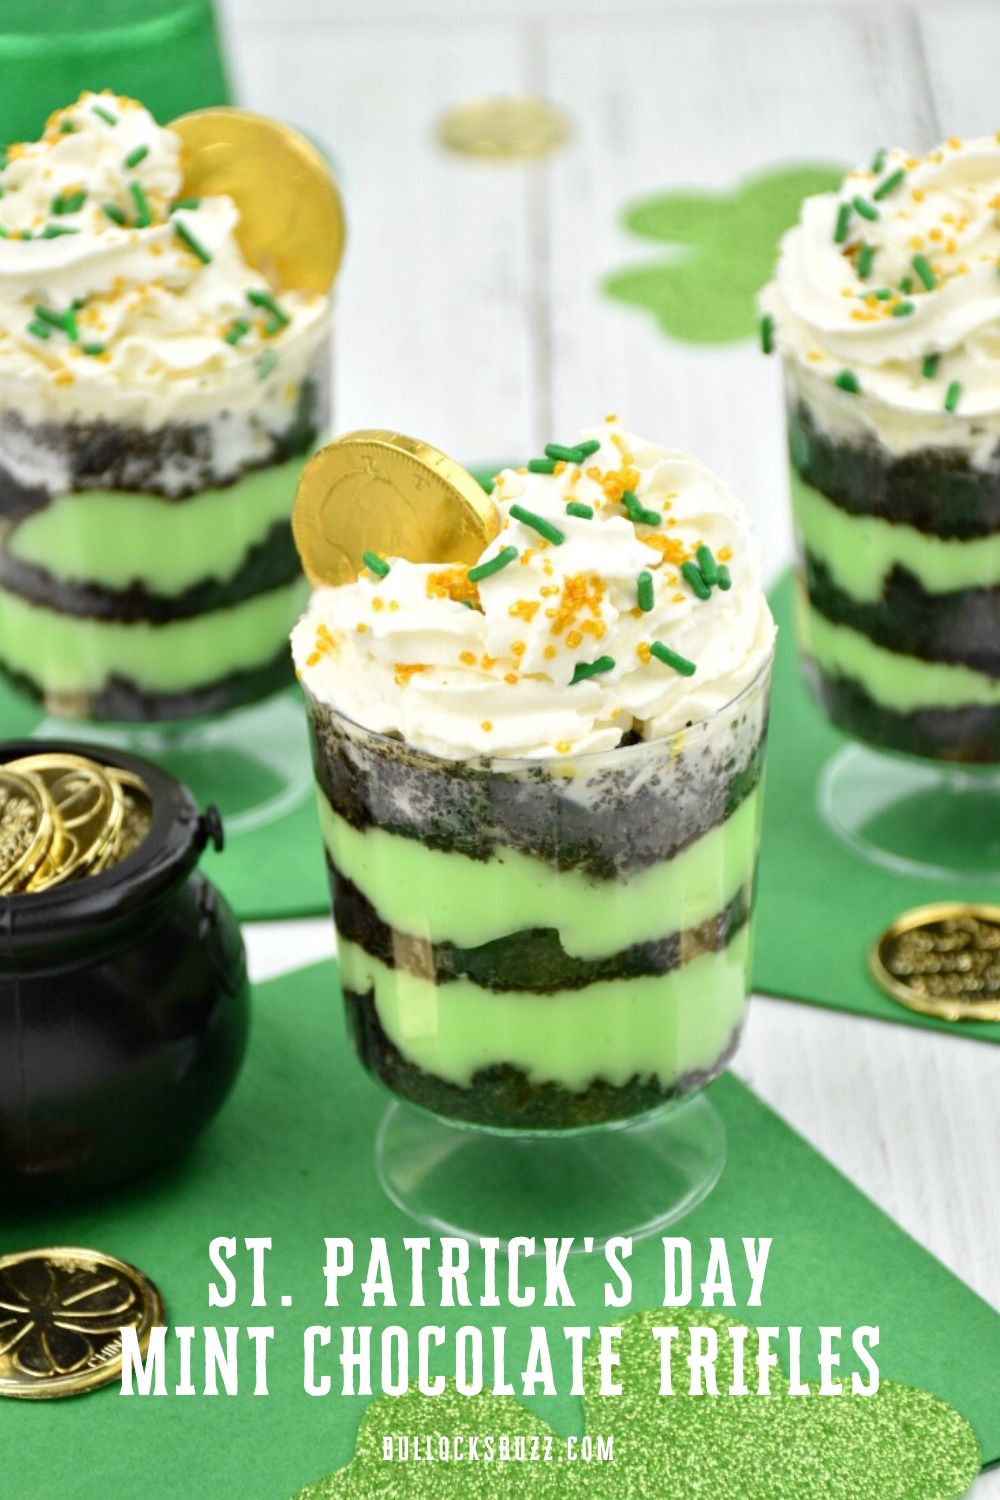 Just in time for St. Patrick's Day, these sinfully delicious mint chocolate trifles alternate smooth and creamy pudding with crunchy chocolate mint cookie crumbles and are topped off with a cloud of whipped cream, green and gold sprinkles, and a chocolate gold coin. Layer after layer of mint chocolate deliciousness, these individual Mint Chocolate Trifles are the perfect St. Patrick’s Day treat.